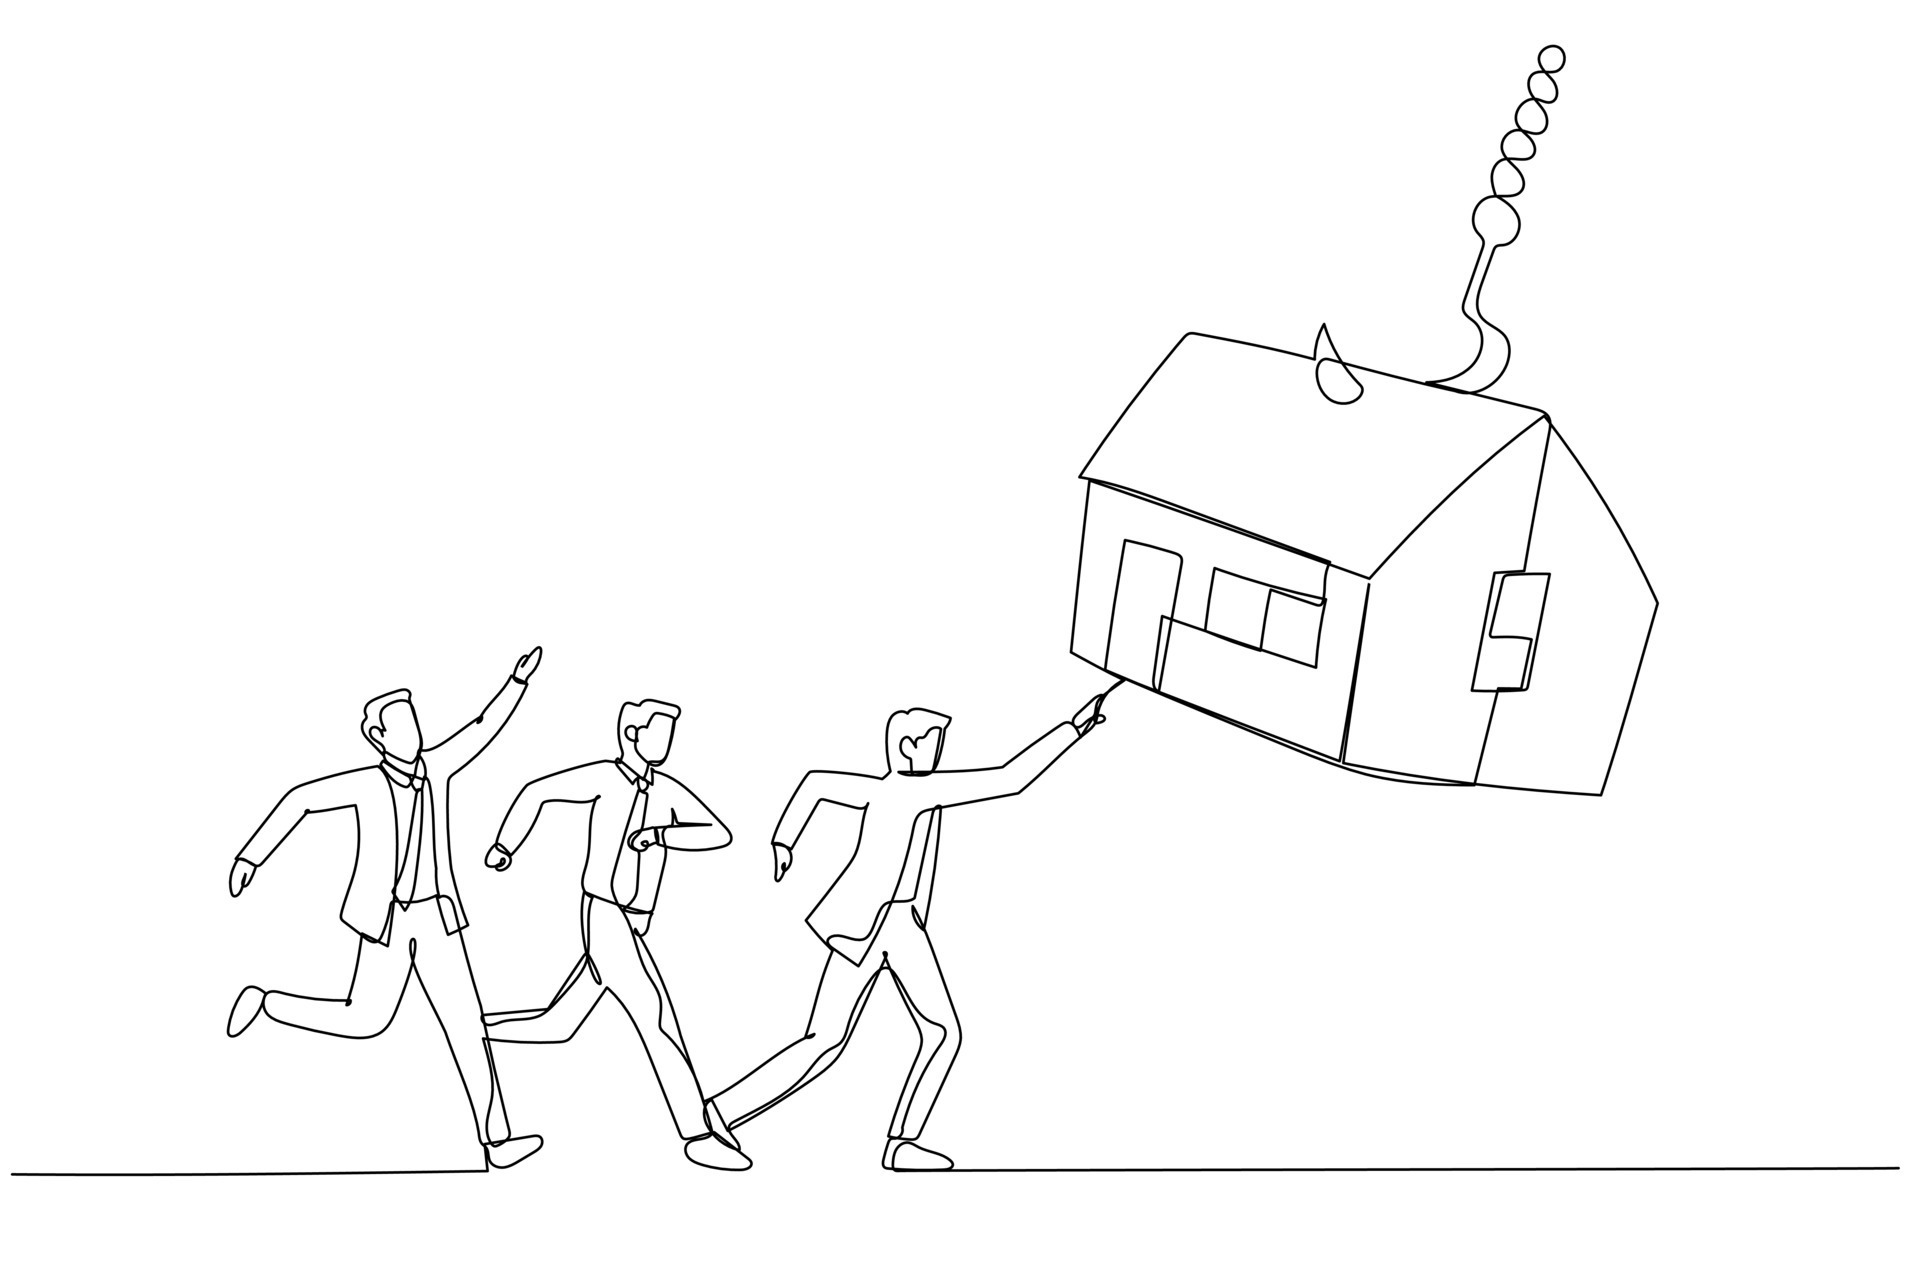 Drawing of group of businessman try to get house bait on fishing